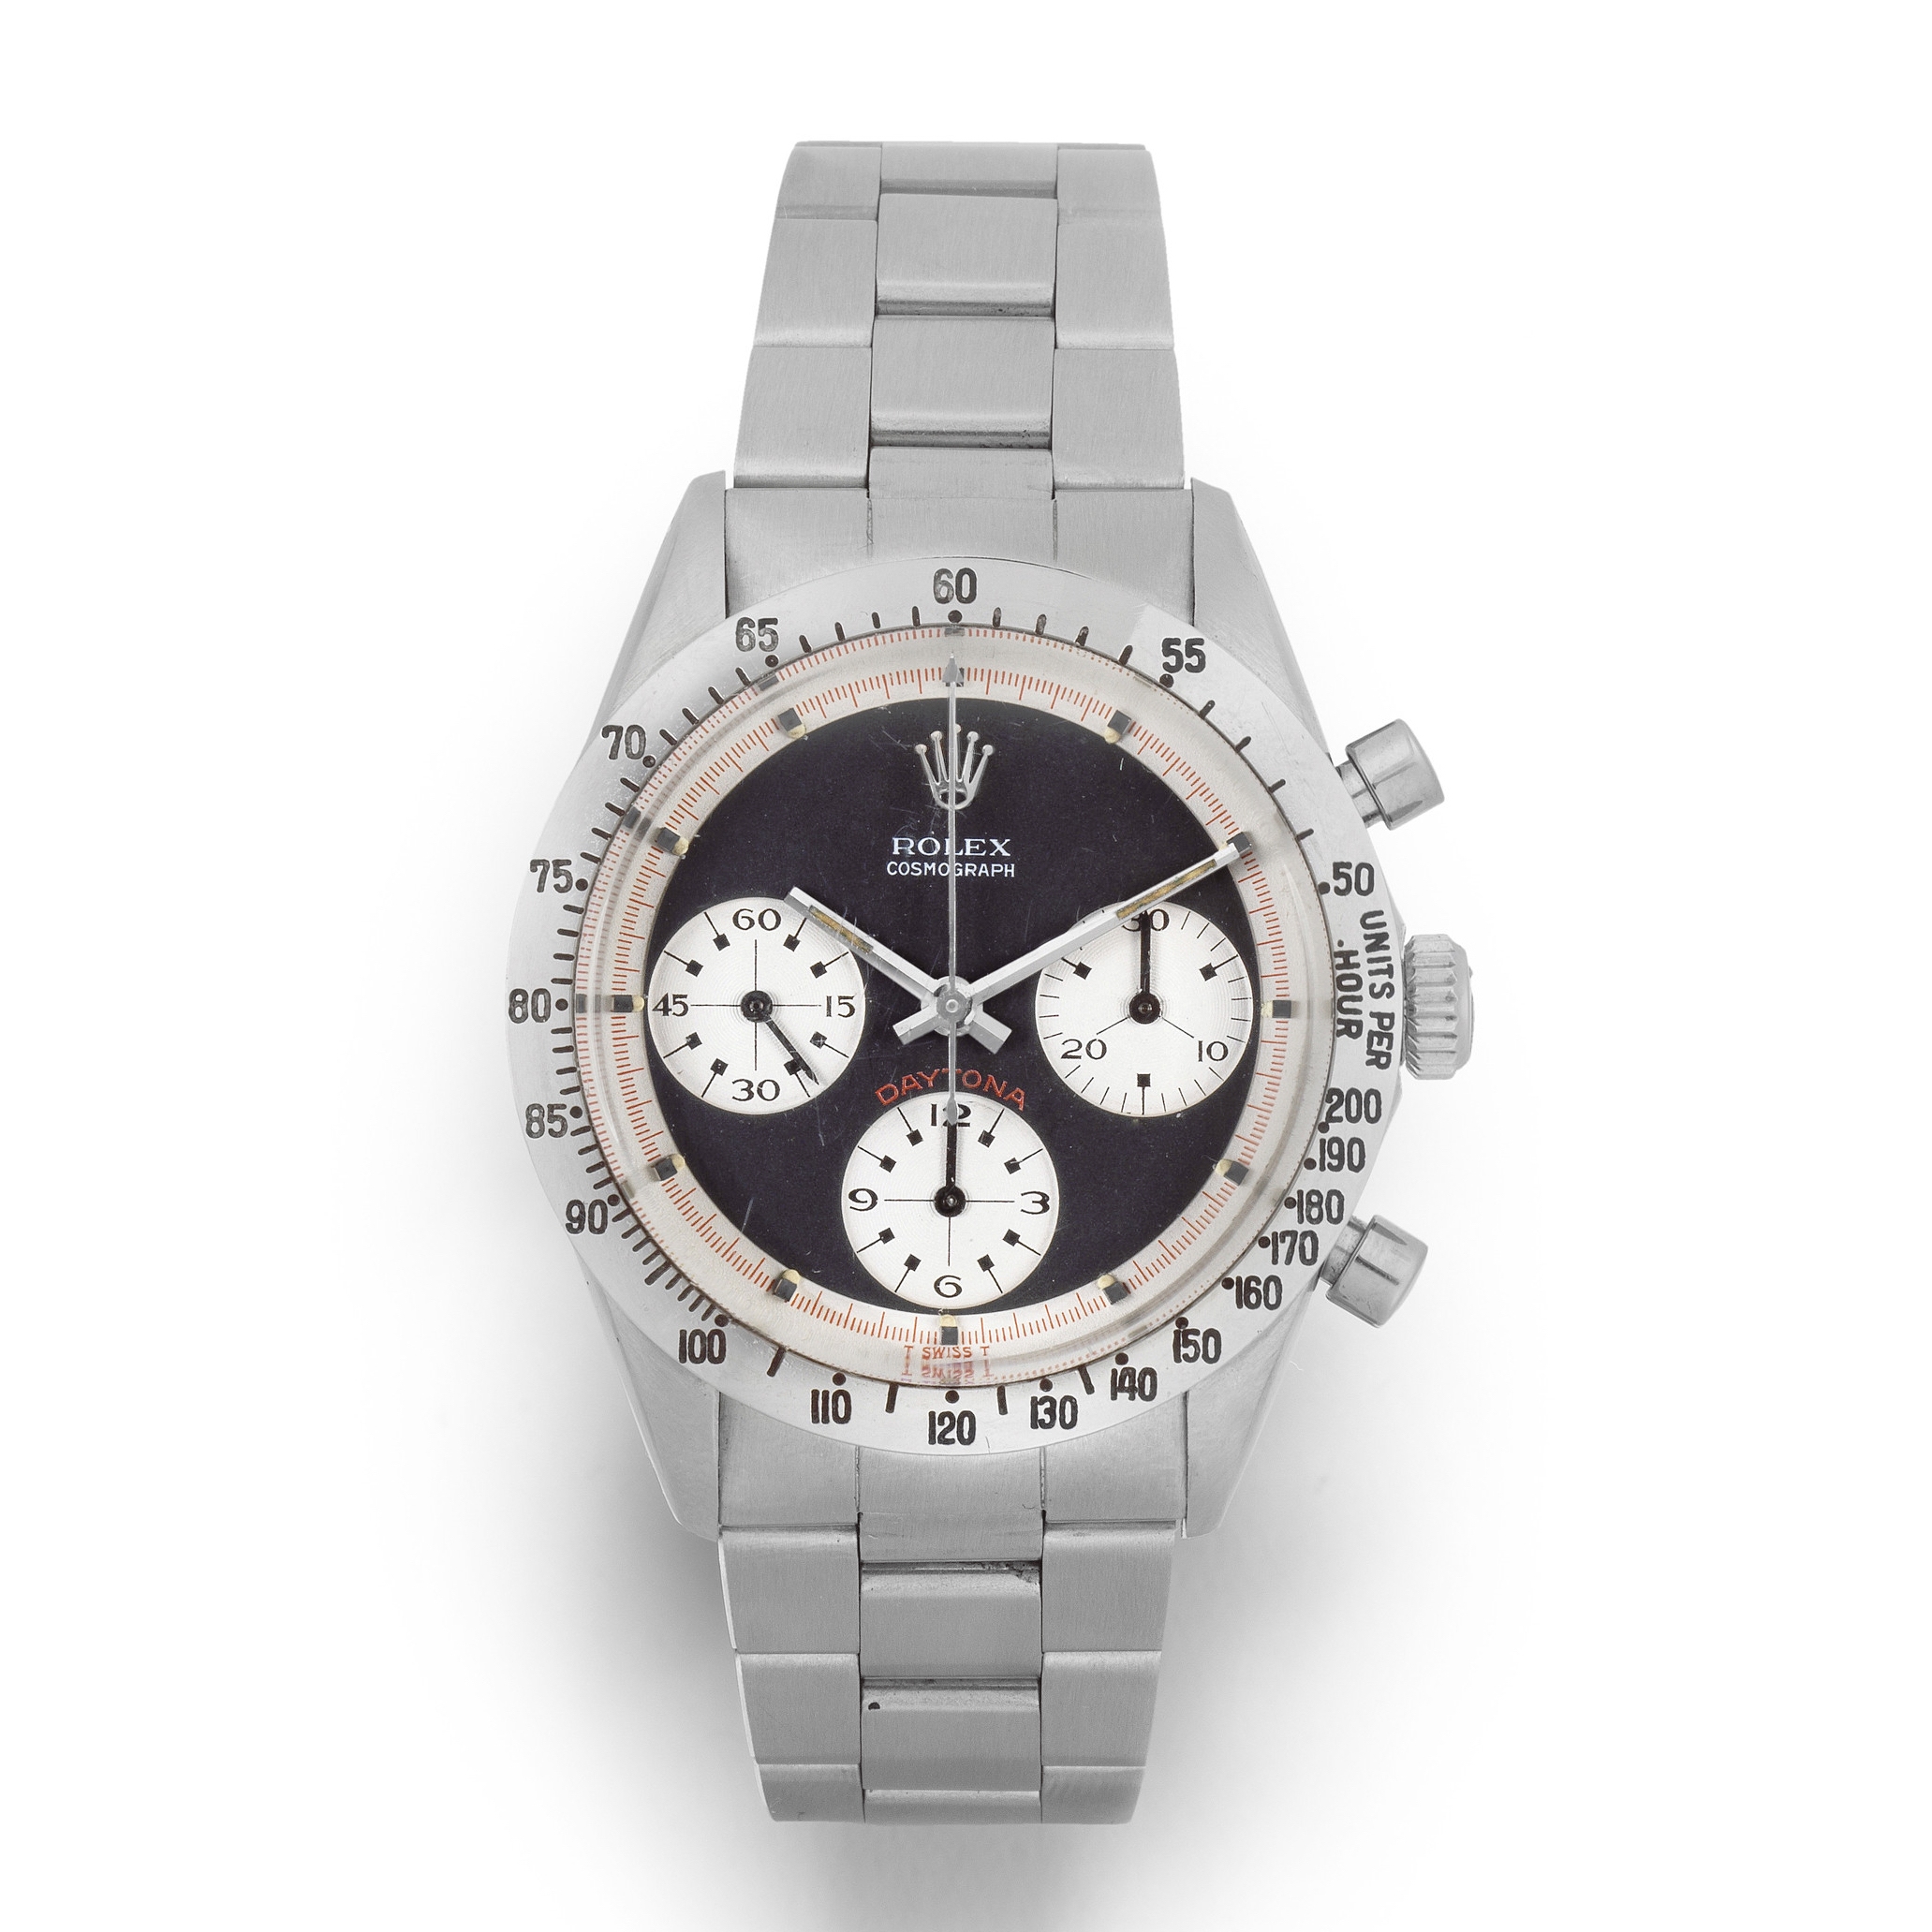 Rolex. A rare stainless steel manual wind chronograph bracelet watch with exotic Paul Newman dial...